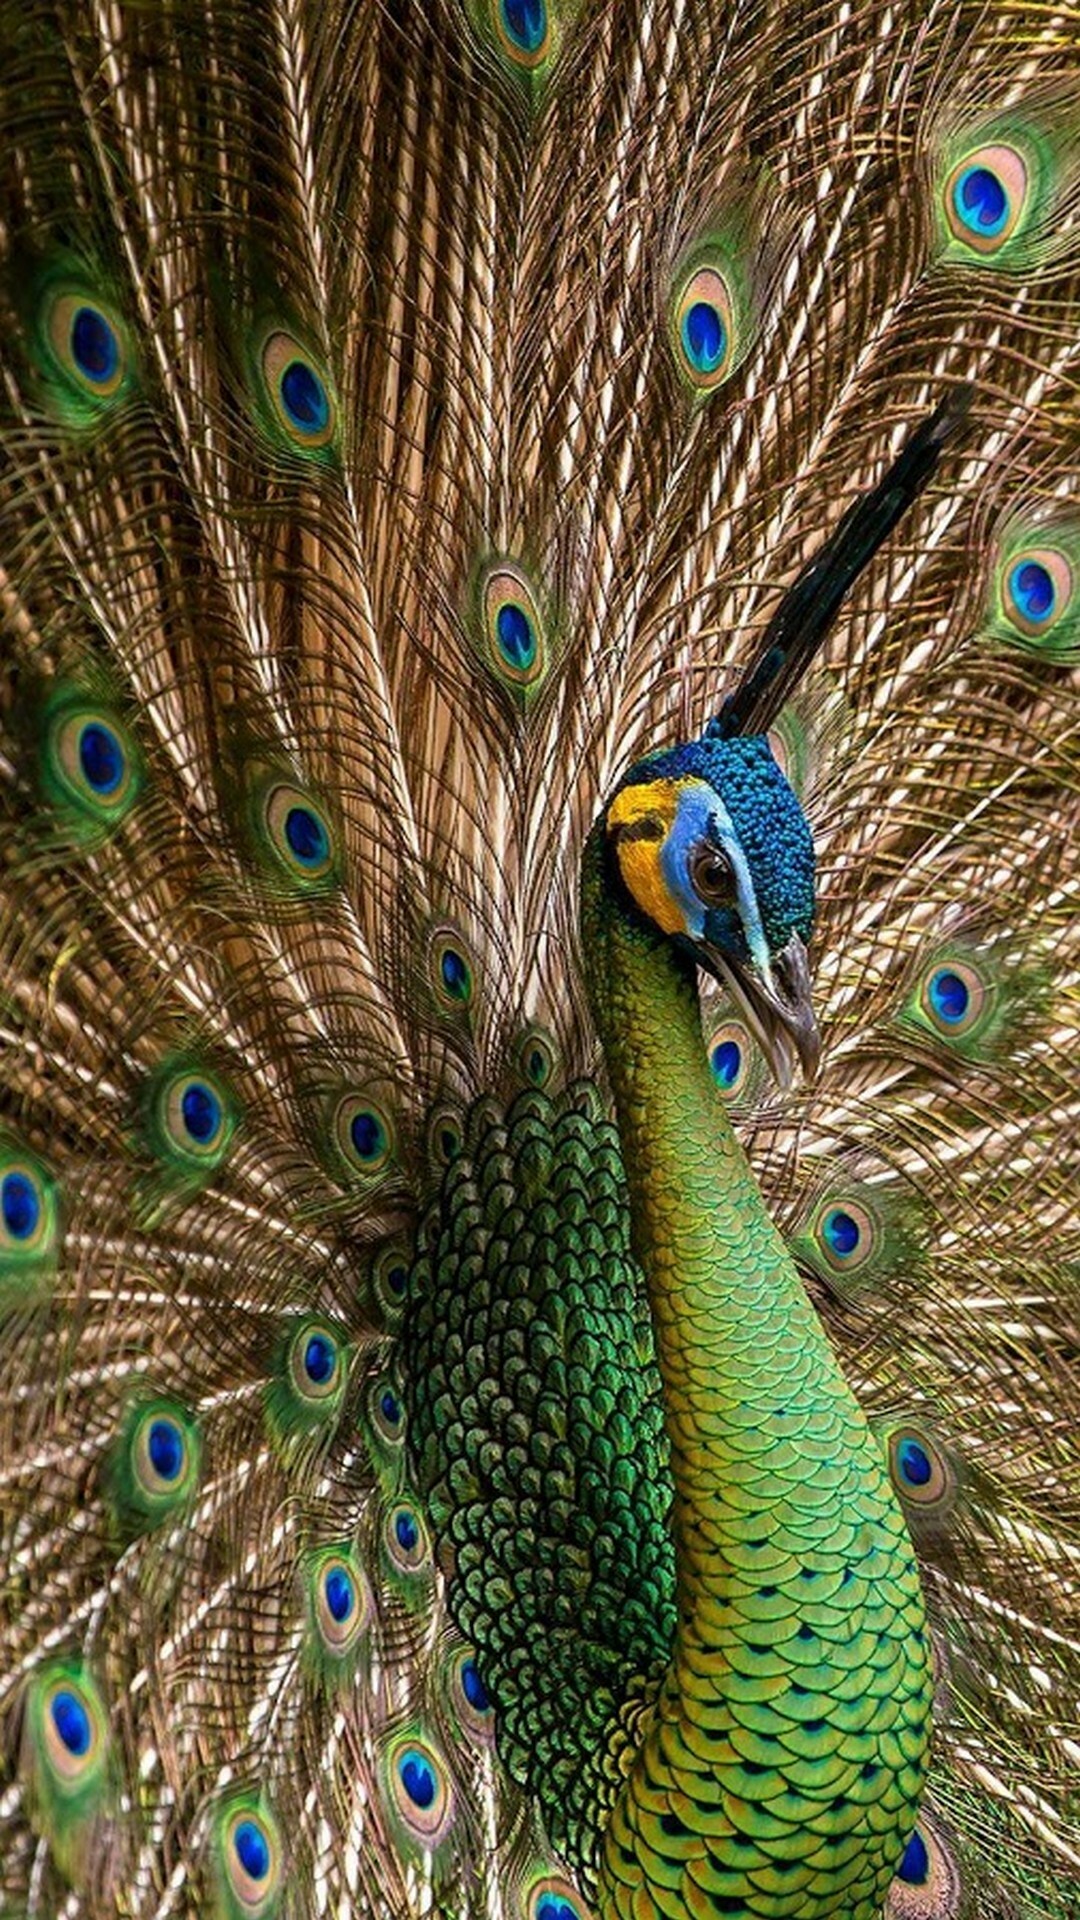 Peacock: The one African species is the Congo peafowl. 1080x1920 Full HD Wallpaper.